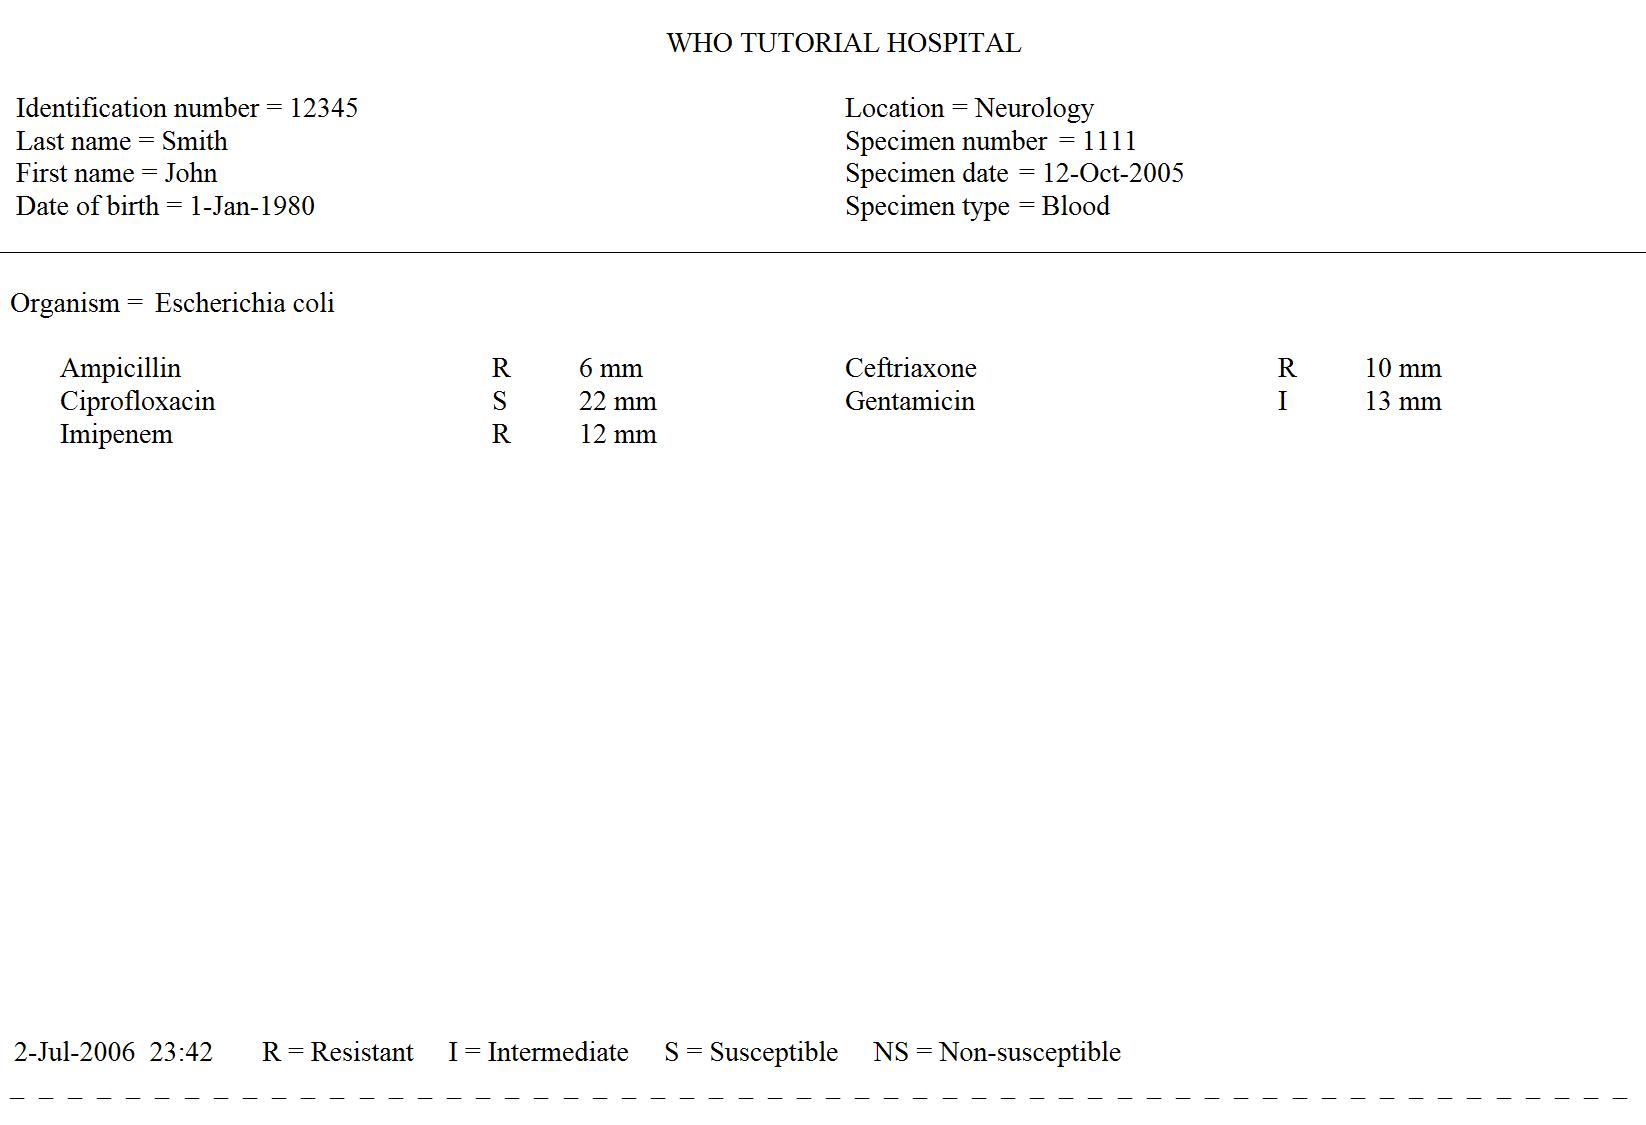 Figure 2.  Clinical reports